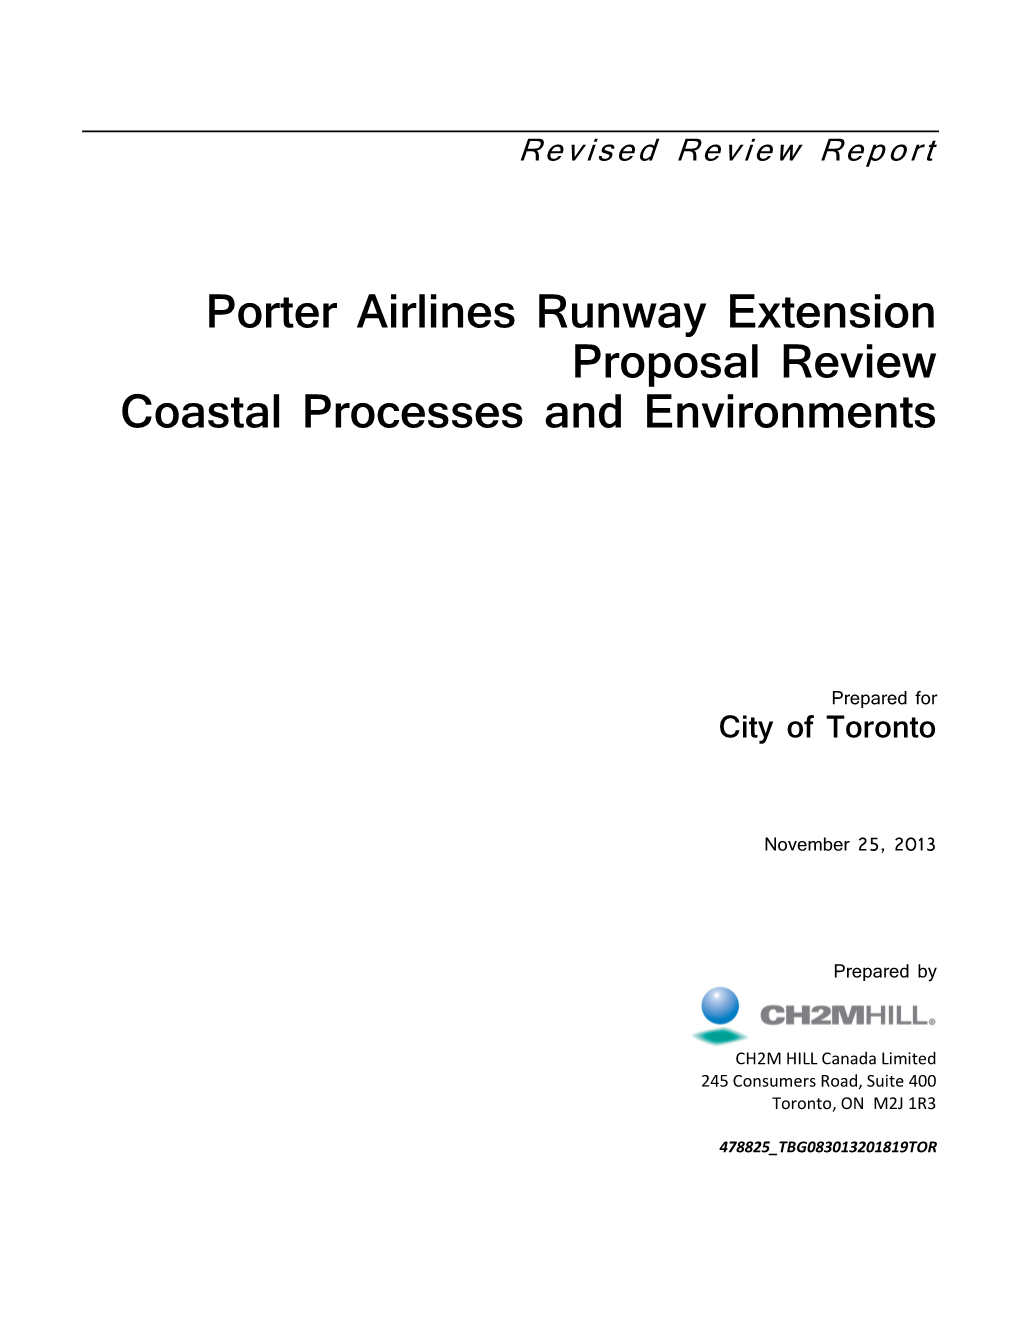 Porter Airlines Runway Extension Proposal Review Coastal Processes and Environments